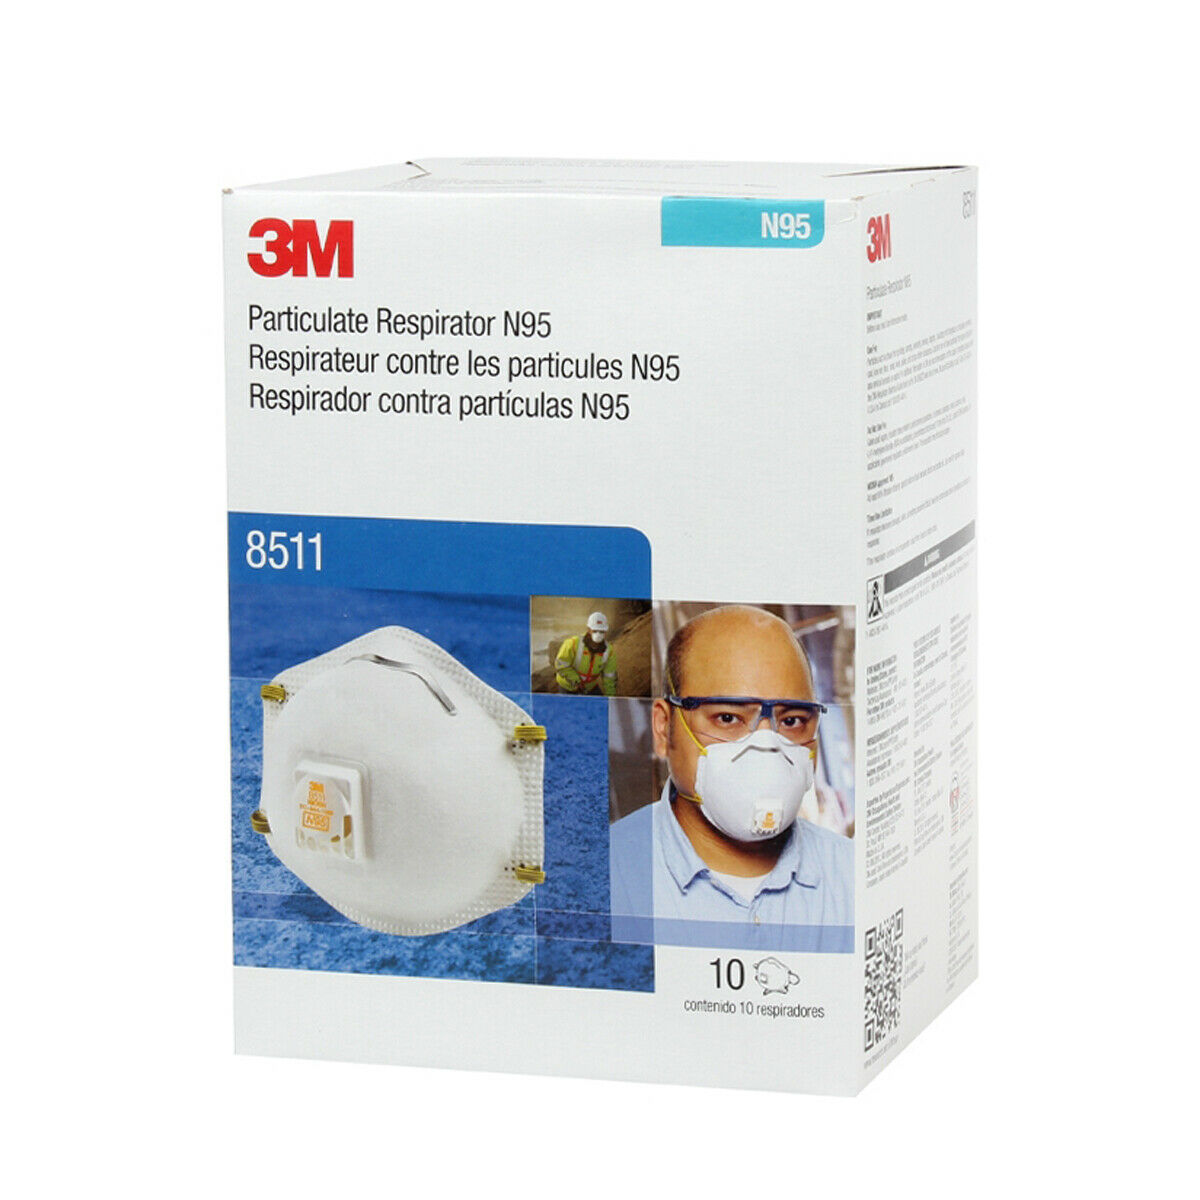 3m 8511 N95 Particulate Respirator W/exhalation Valve 10 Masks/box, Exp. 02/2026